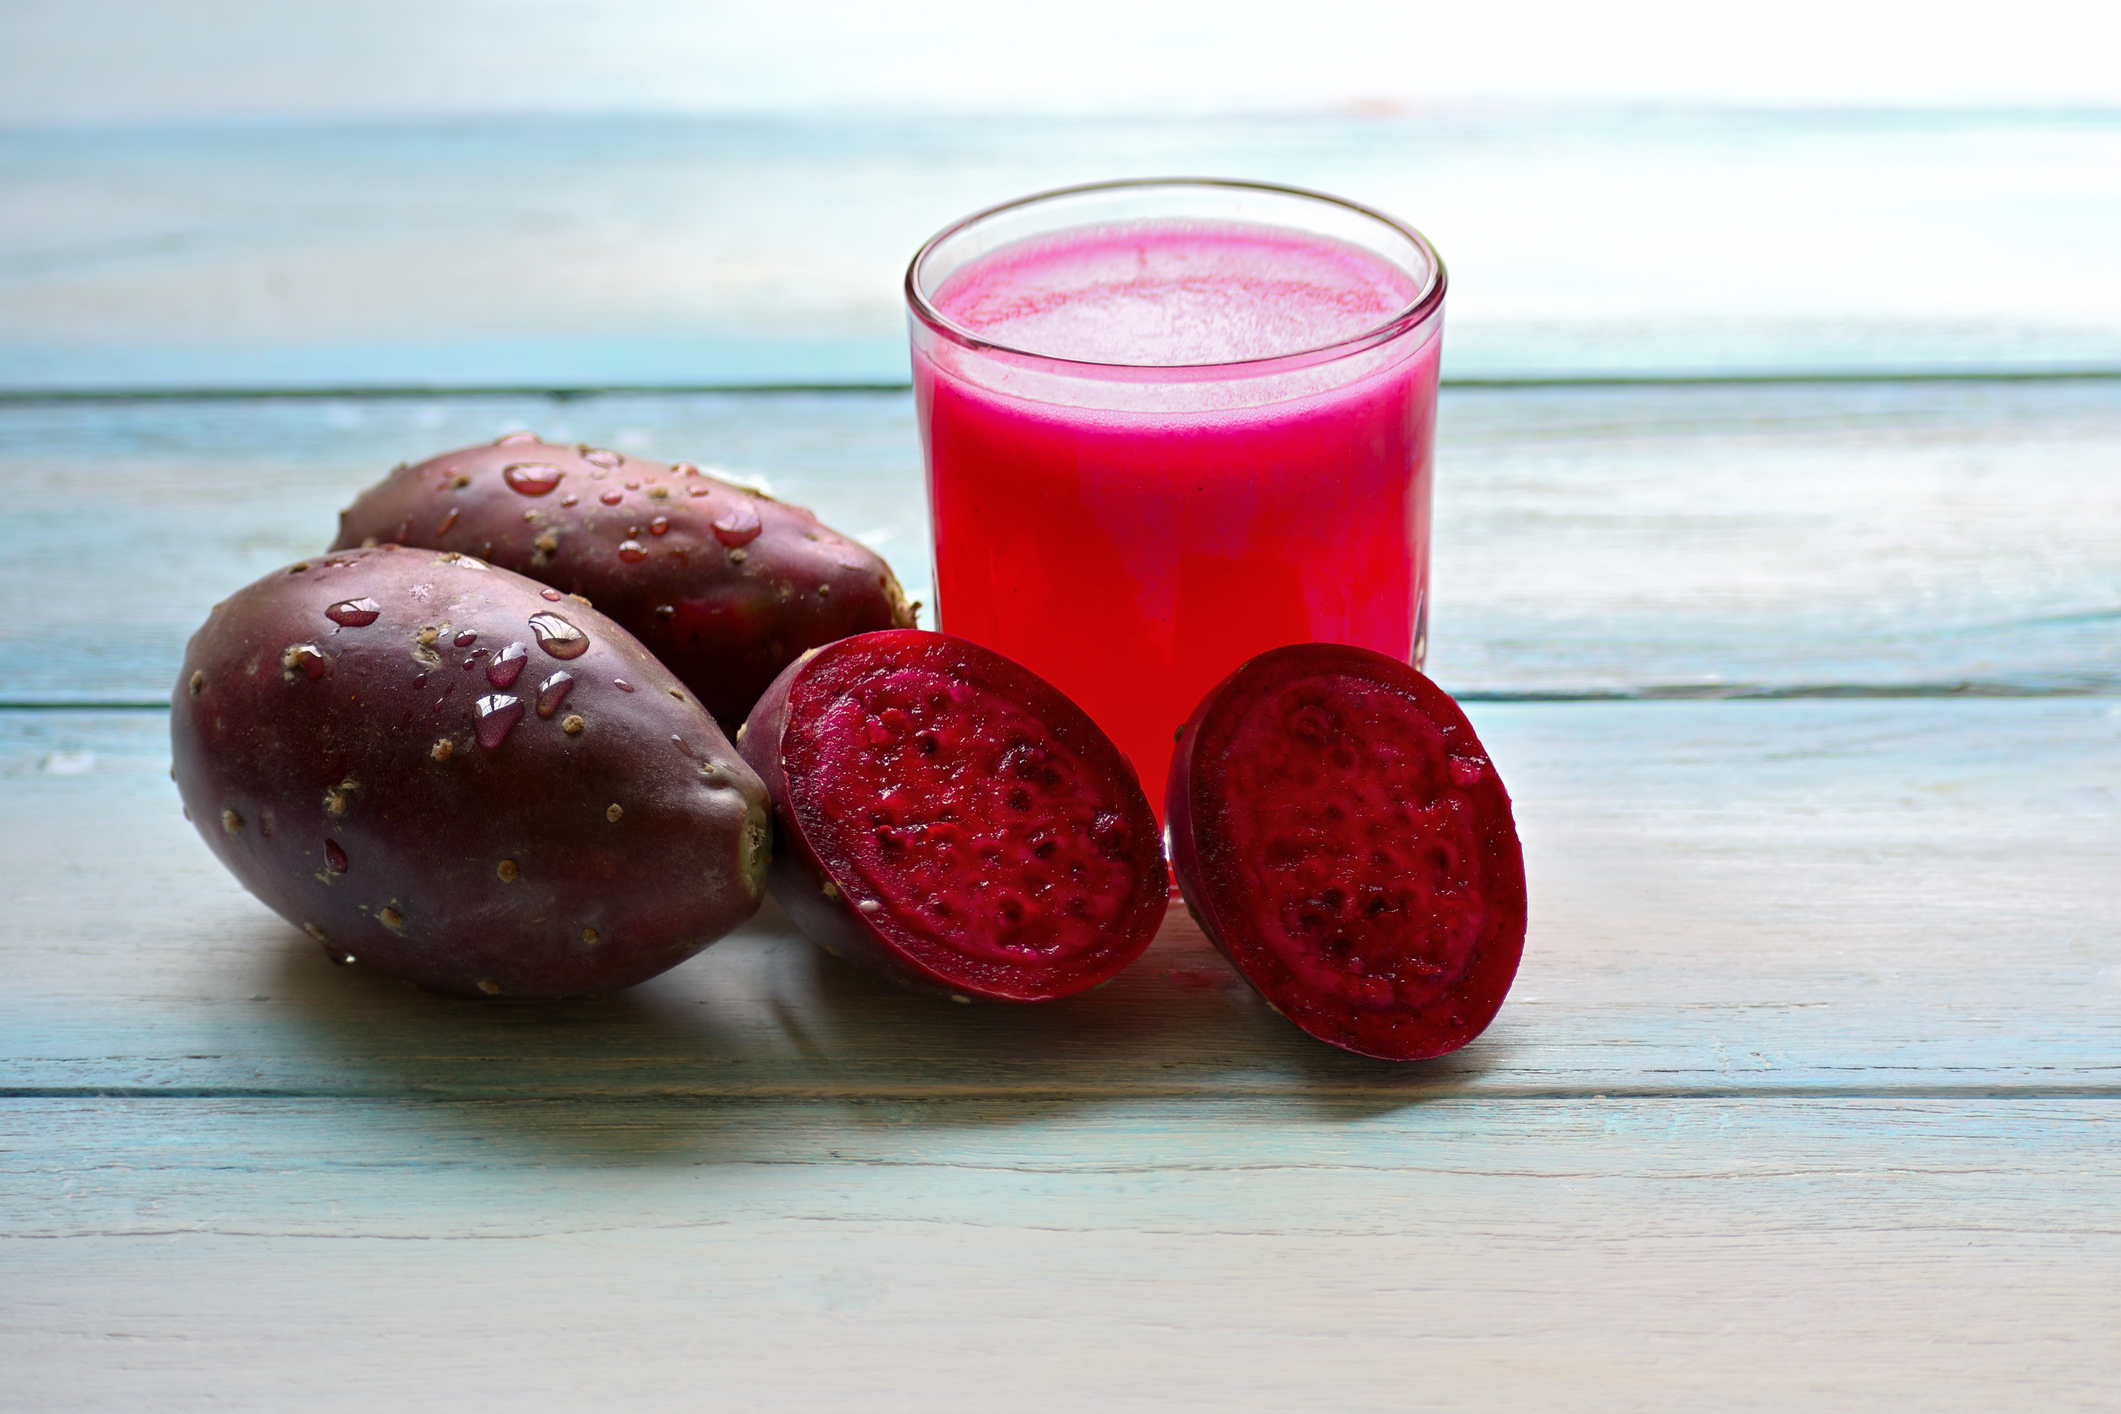 Prickly pear: The cactus fruit that lowers cholesterol